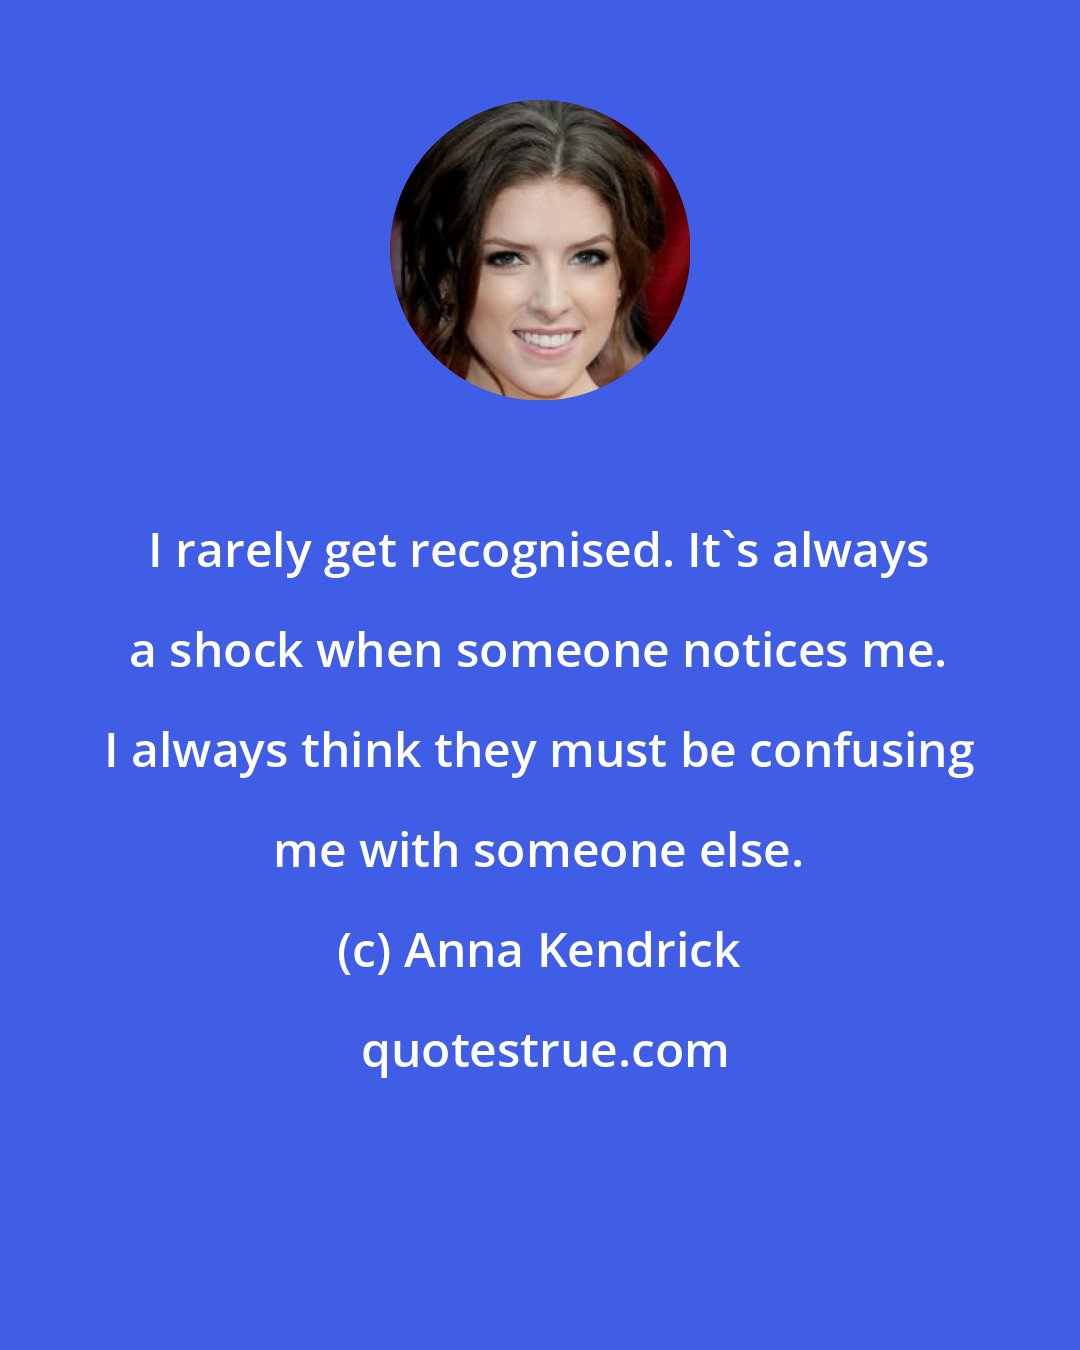 Anna Kendrick: I rarely get recognised. It's always a shock when someone notices me. I always think they must be confusing me with someone else.